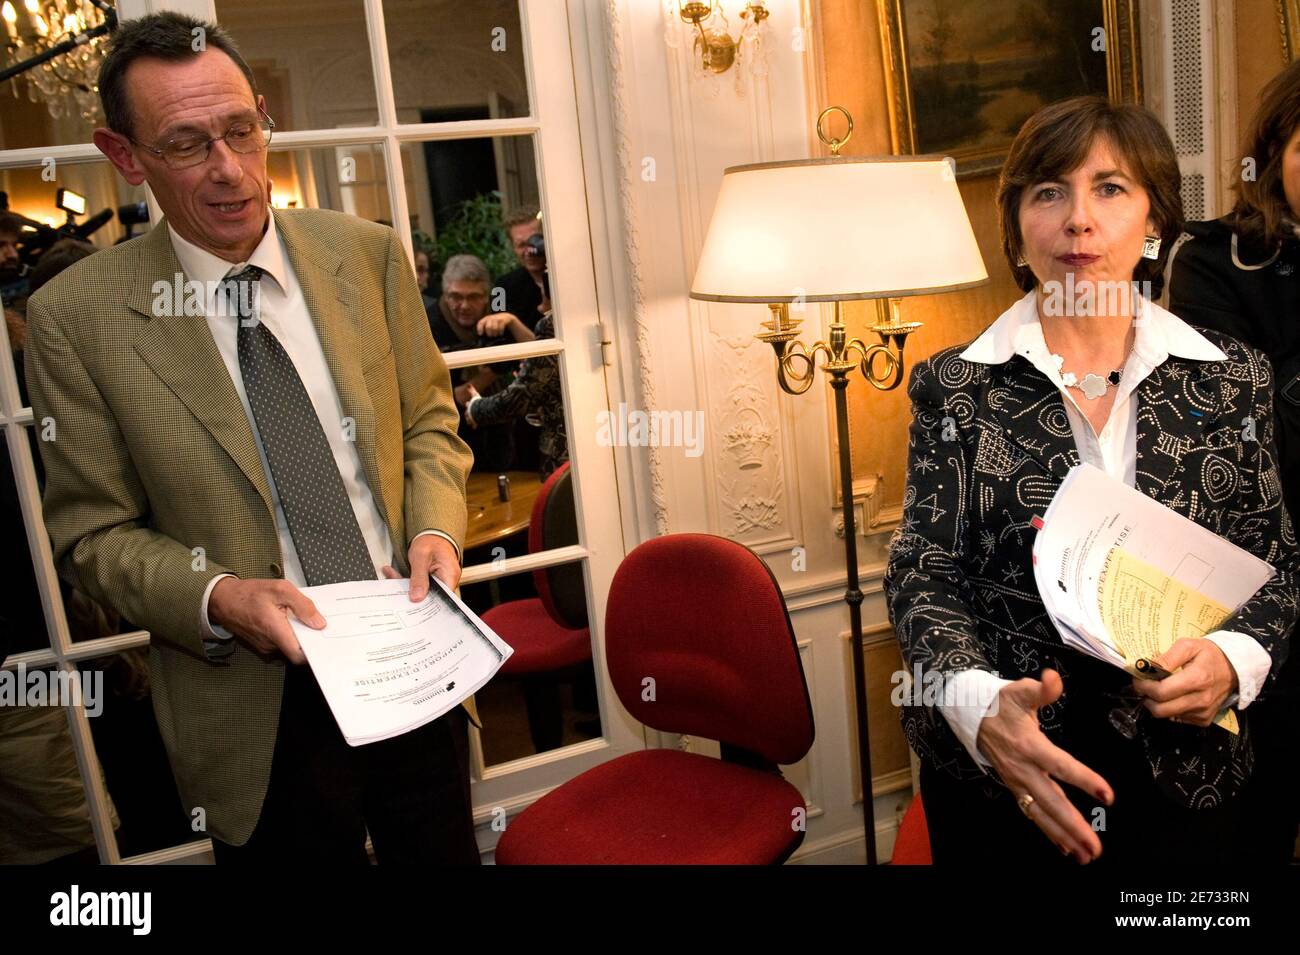 Marie-Christine Chastant-Morand (R) and Thierry Moser, lawyers of Christine  and Jean-Marie Villemin, parents of murdered 4-year-old Gregory, speak to  the media after a news conference in Paris October 22, 2009 about the